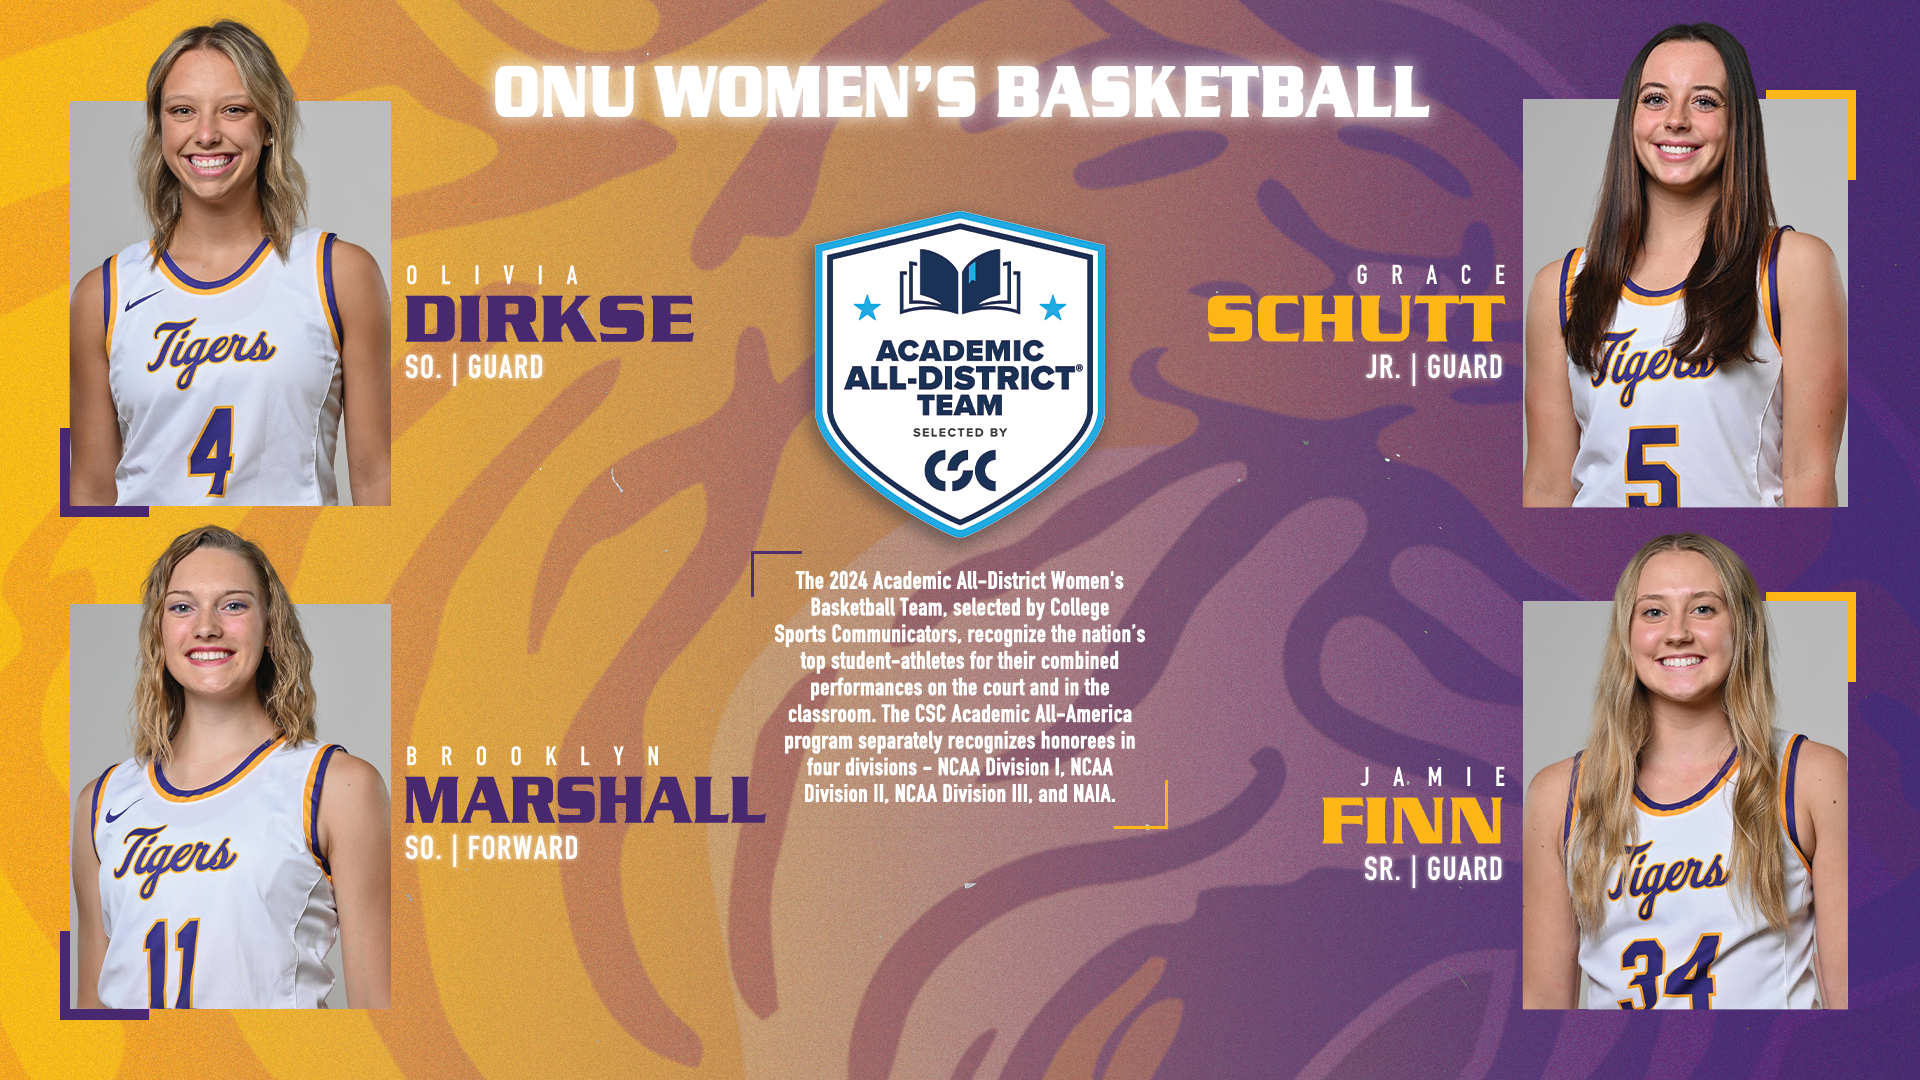 TIGERBALL NAMES FOUR TO CSC ACADEMIC ALL-DISTRICT TEAM